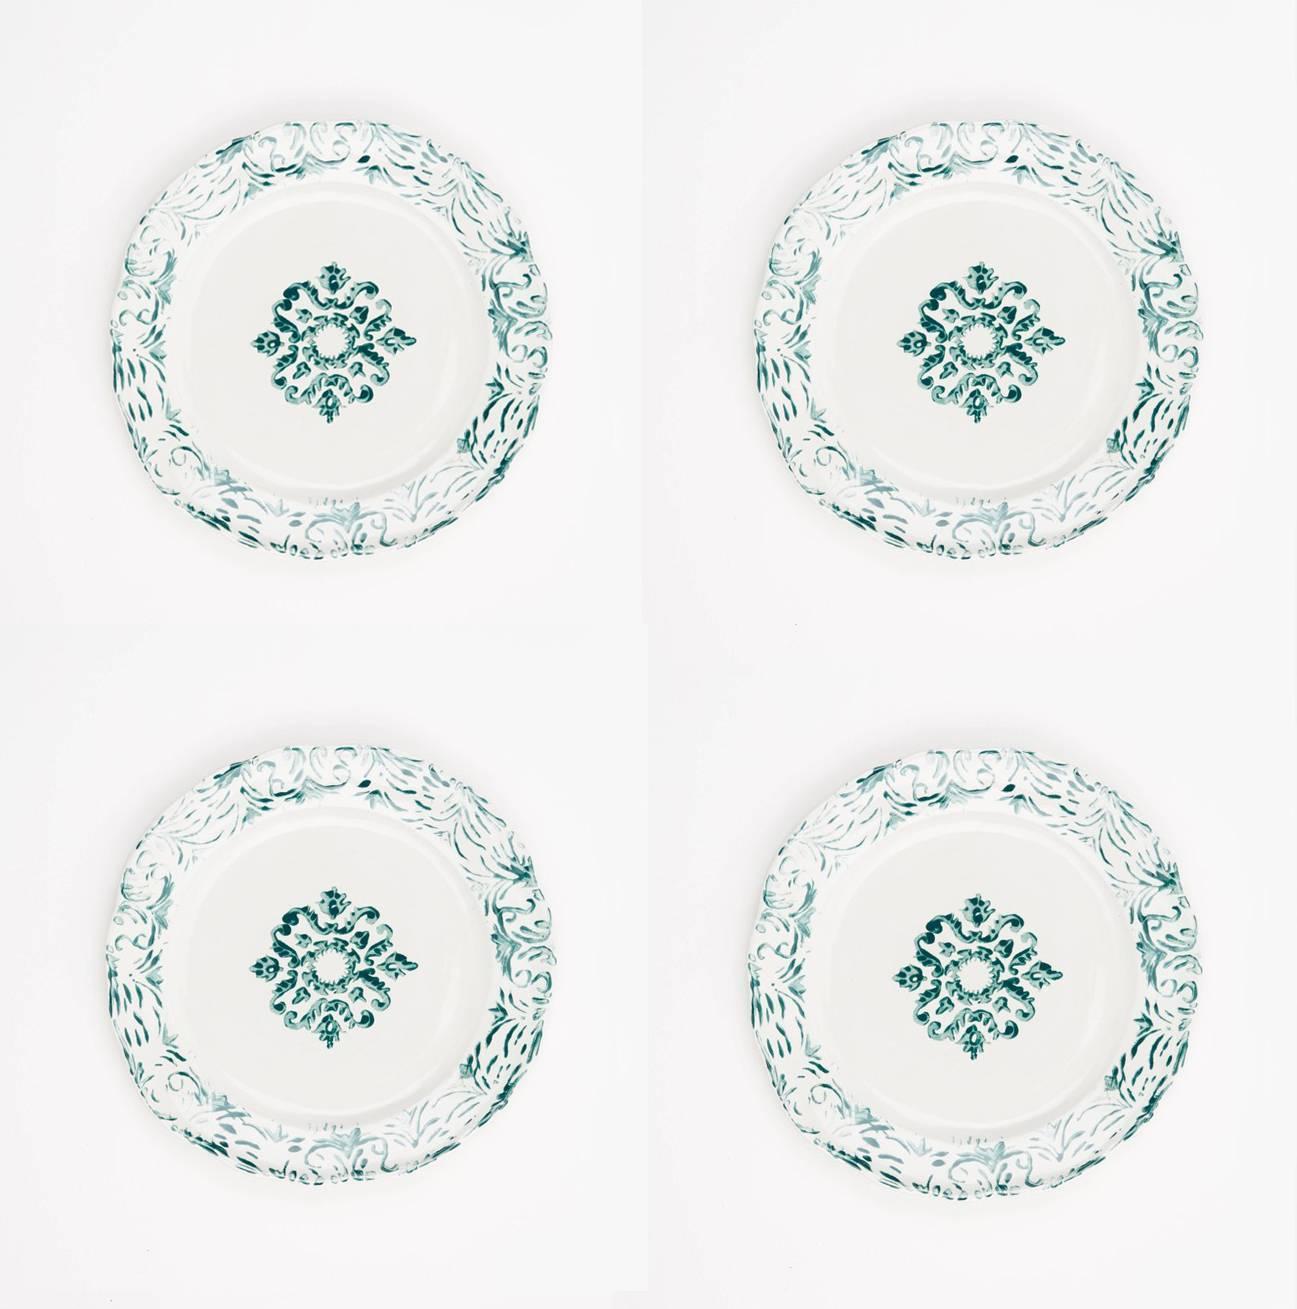 Hand printed green and white floral dinner plates, set of four.
These ceramic plates are handmade and hand-painted by Zsuzsanna Nyul. They are high fired stoneware pieces with different designs created using an unique technique. The bottom of the